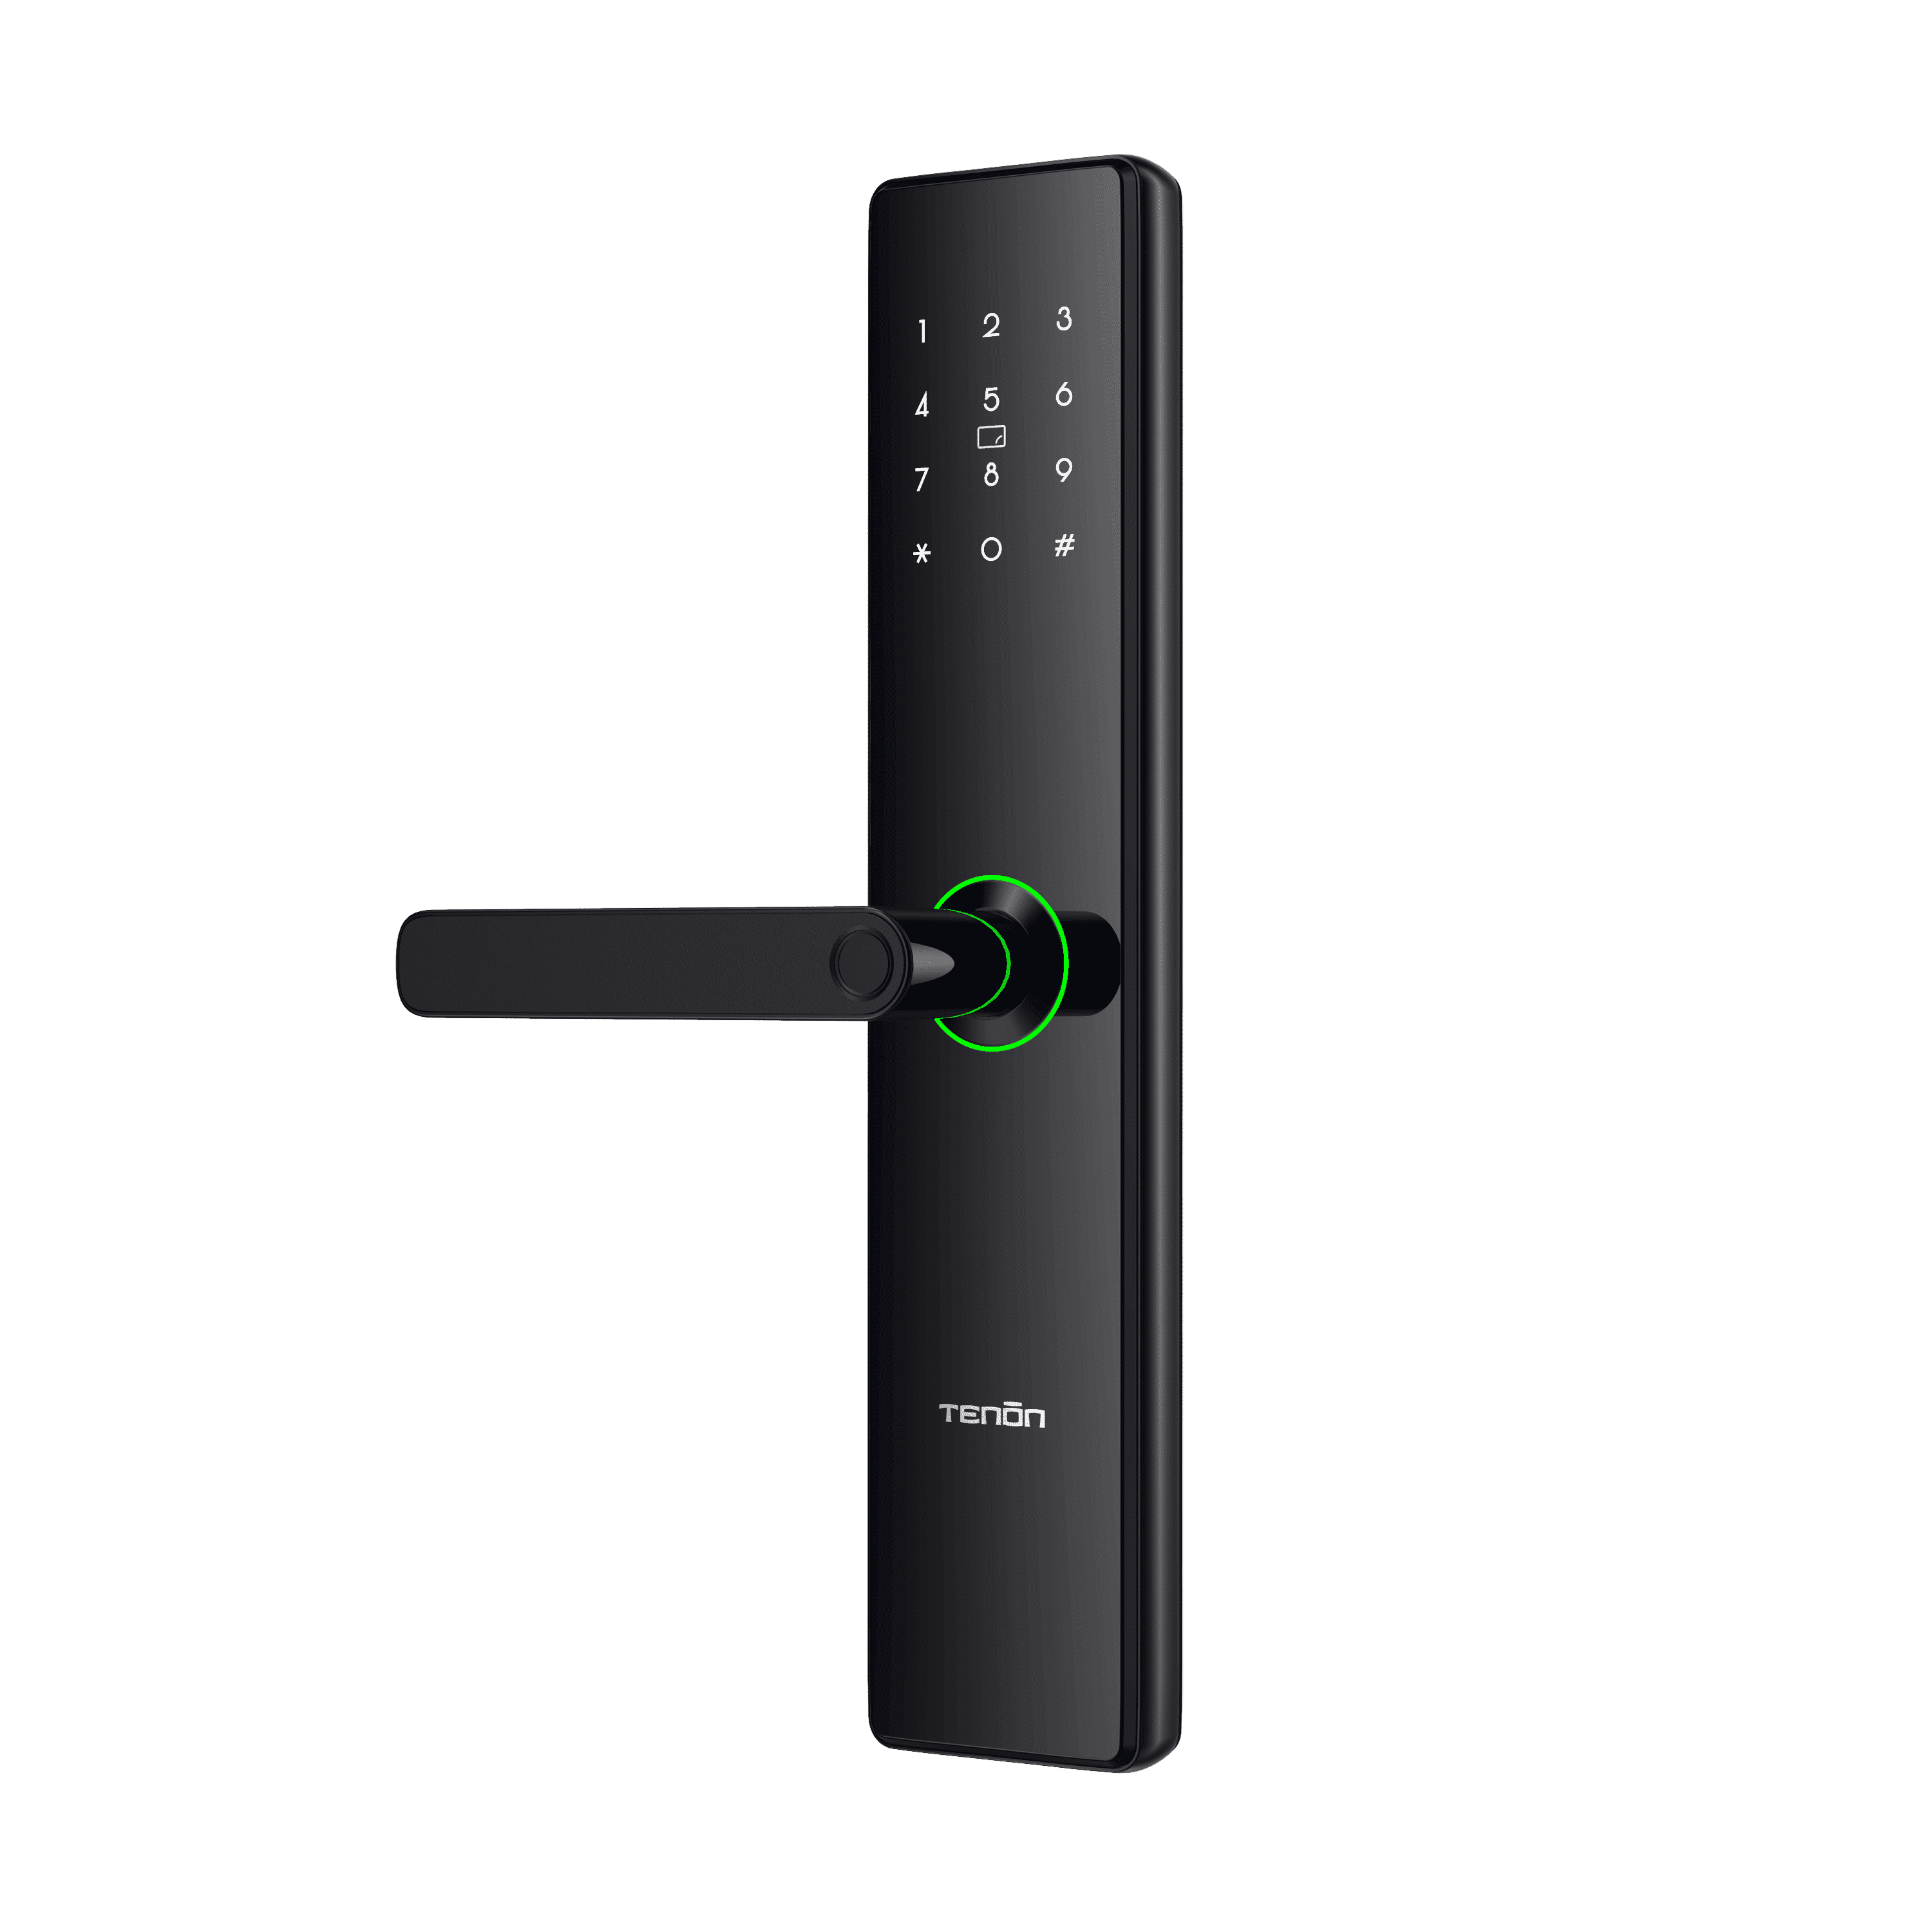 Remote Access Smart Touchpad Bluetooth-Enabled Smart Lock